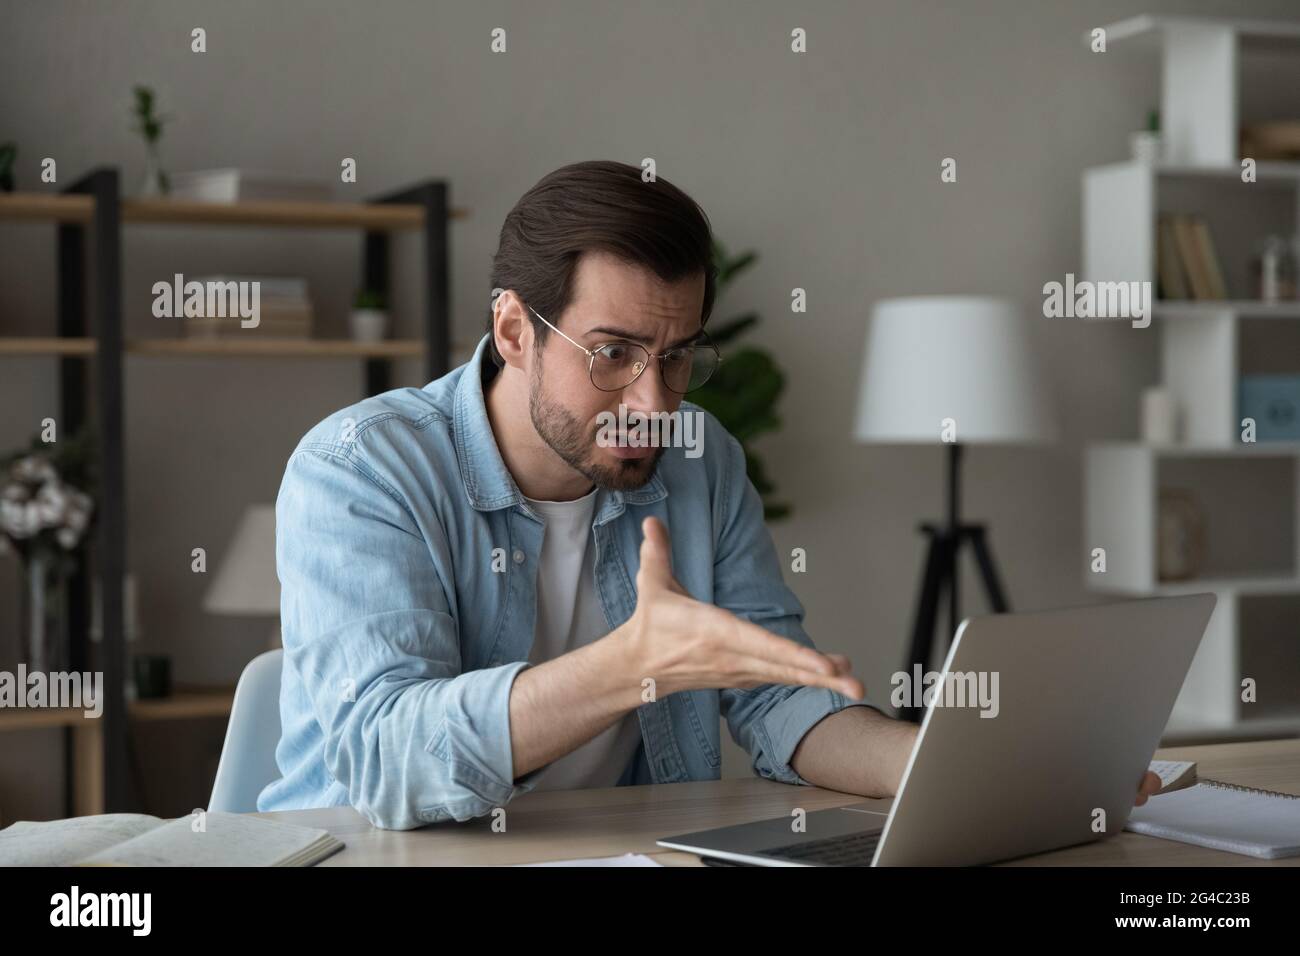 Angry confused young man looking at laptop screen. Stock Photo